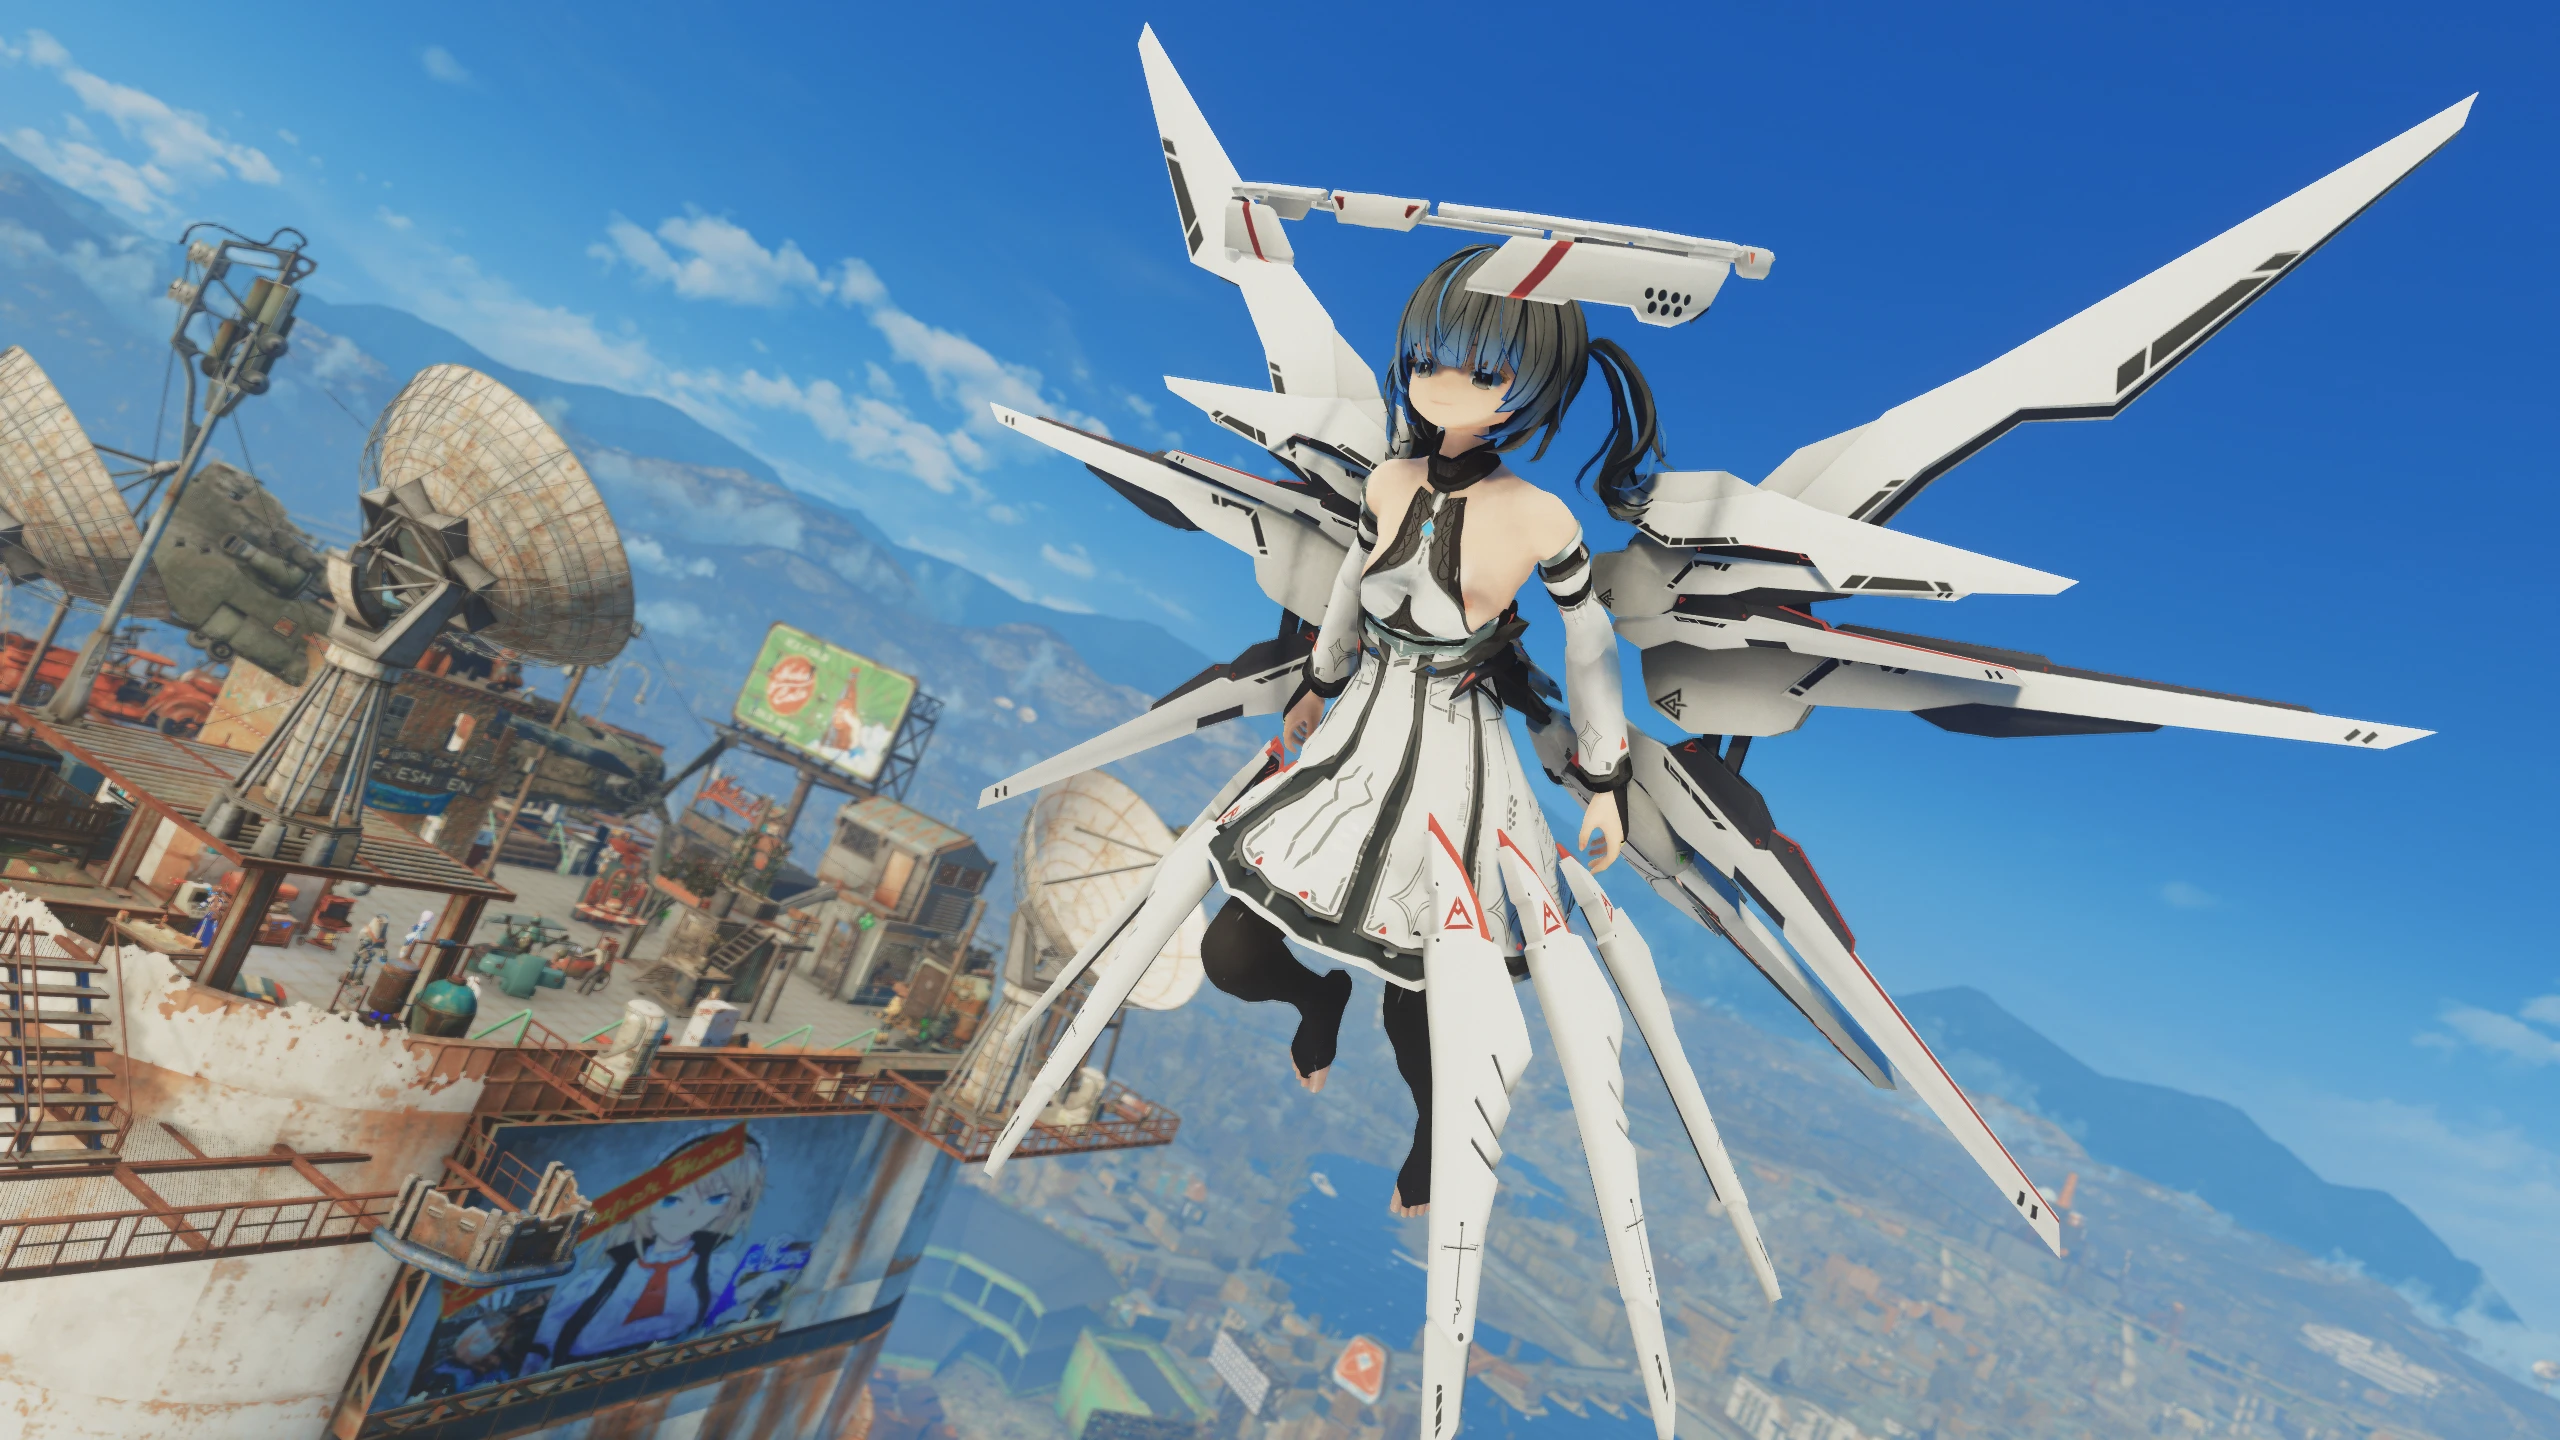 Jetpack Animations Anime Girl at Fallout 4 Nexus - Mods and community